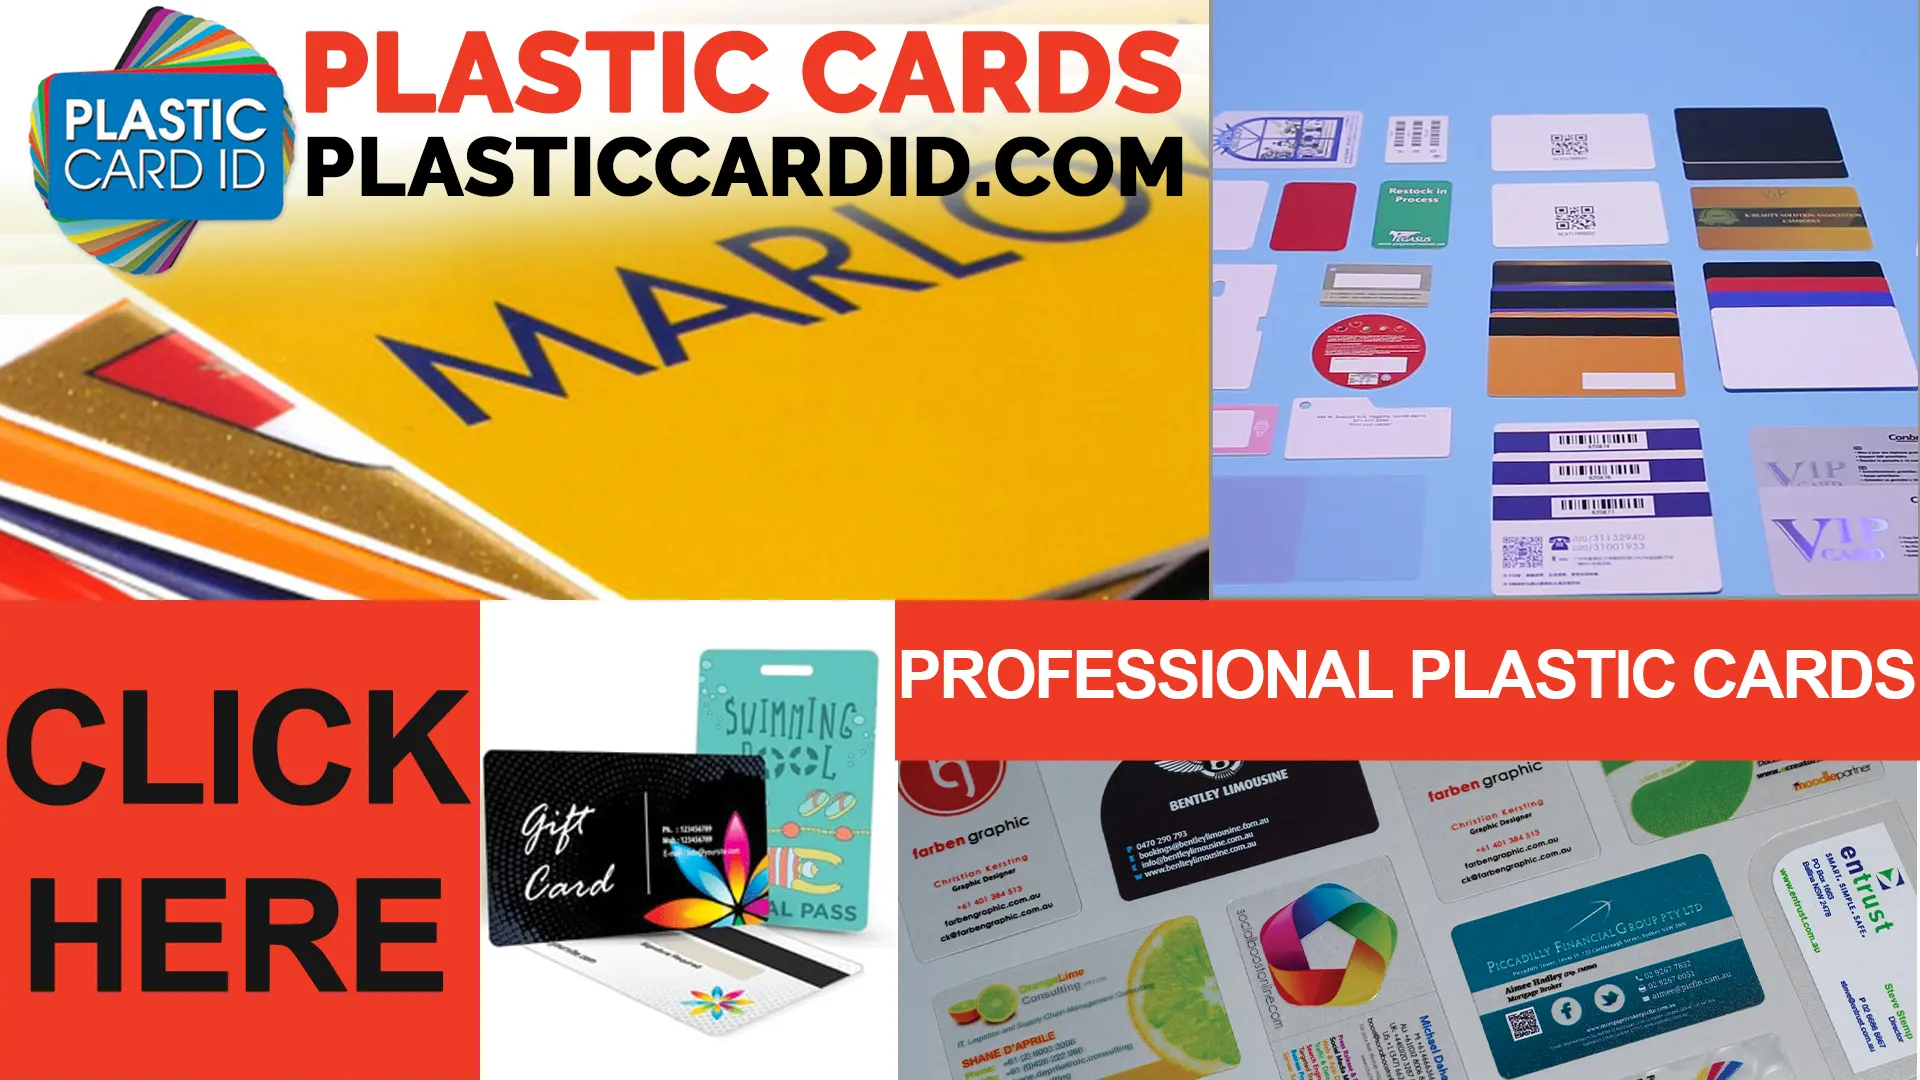 Welcome to High-Quality Plastic Card Printing